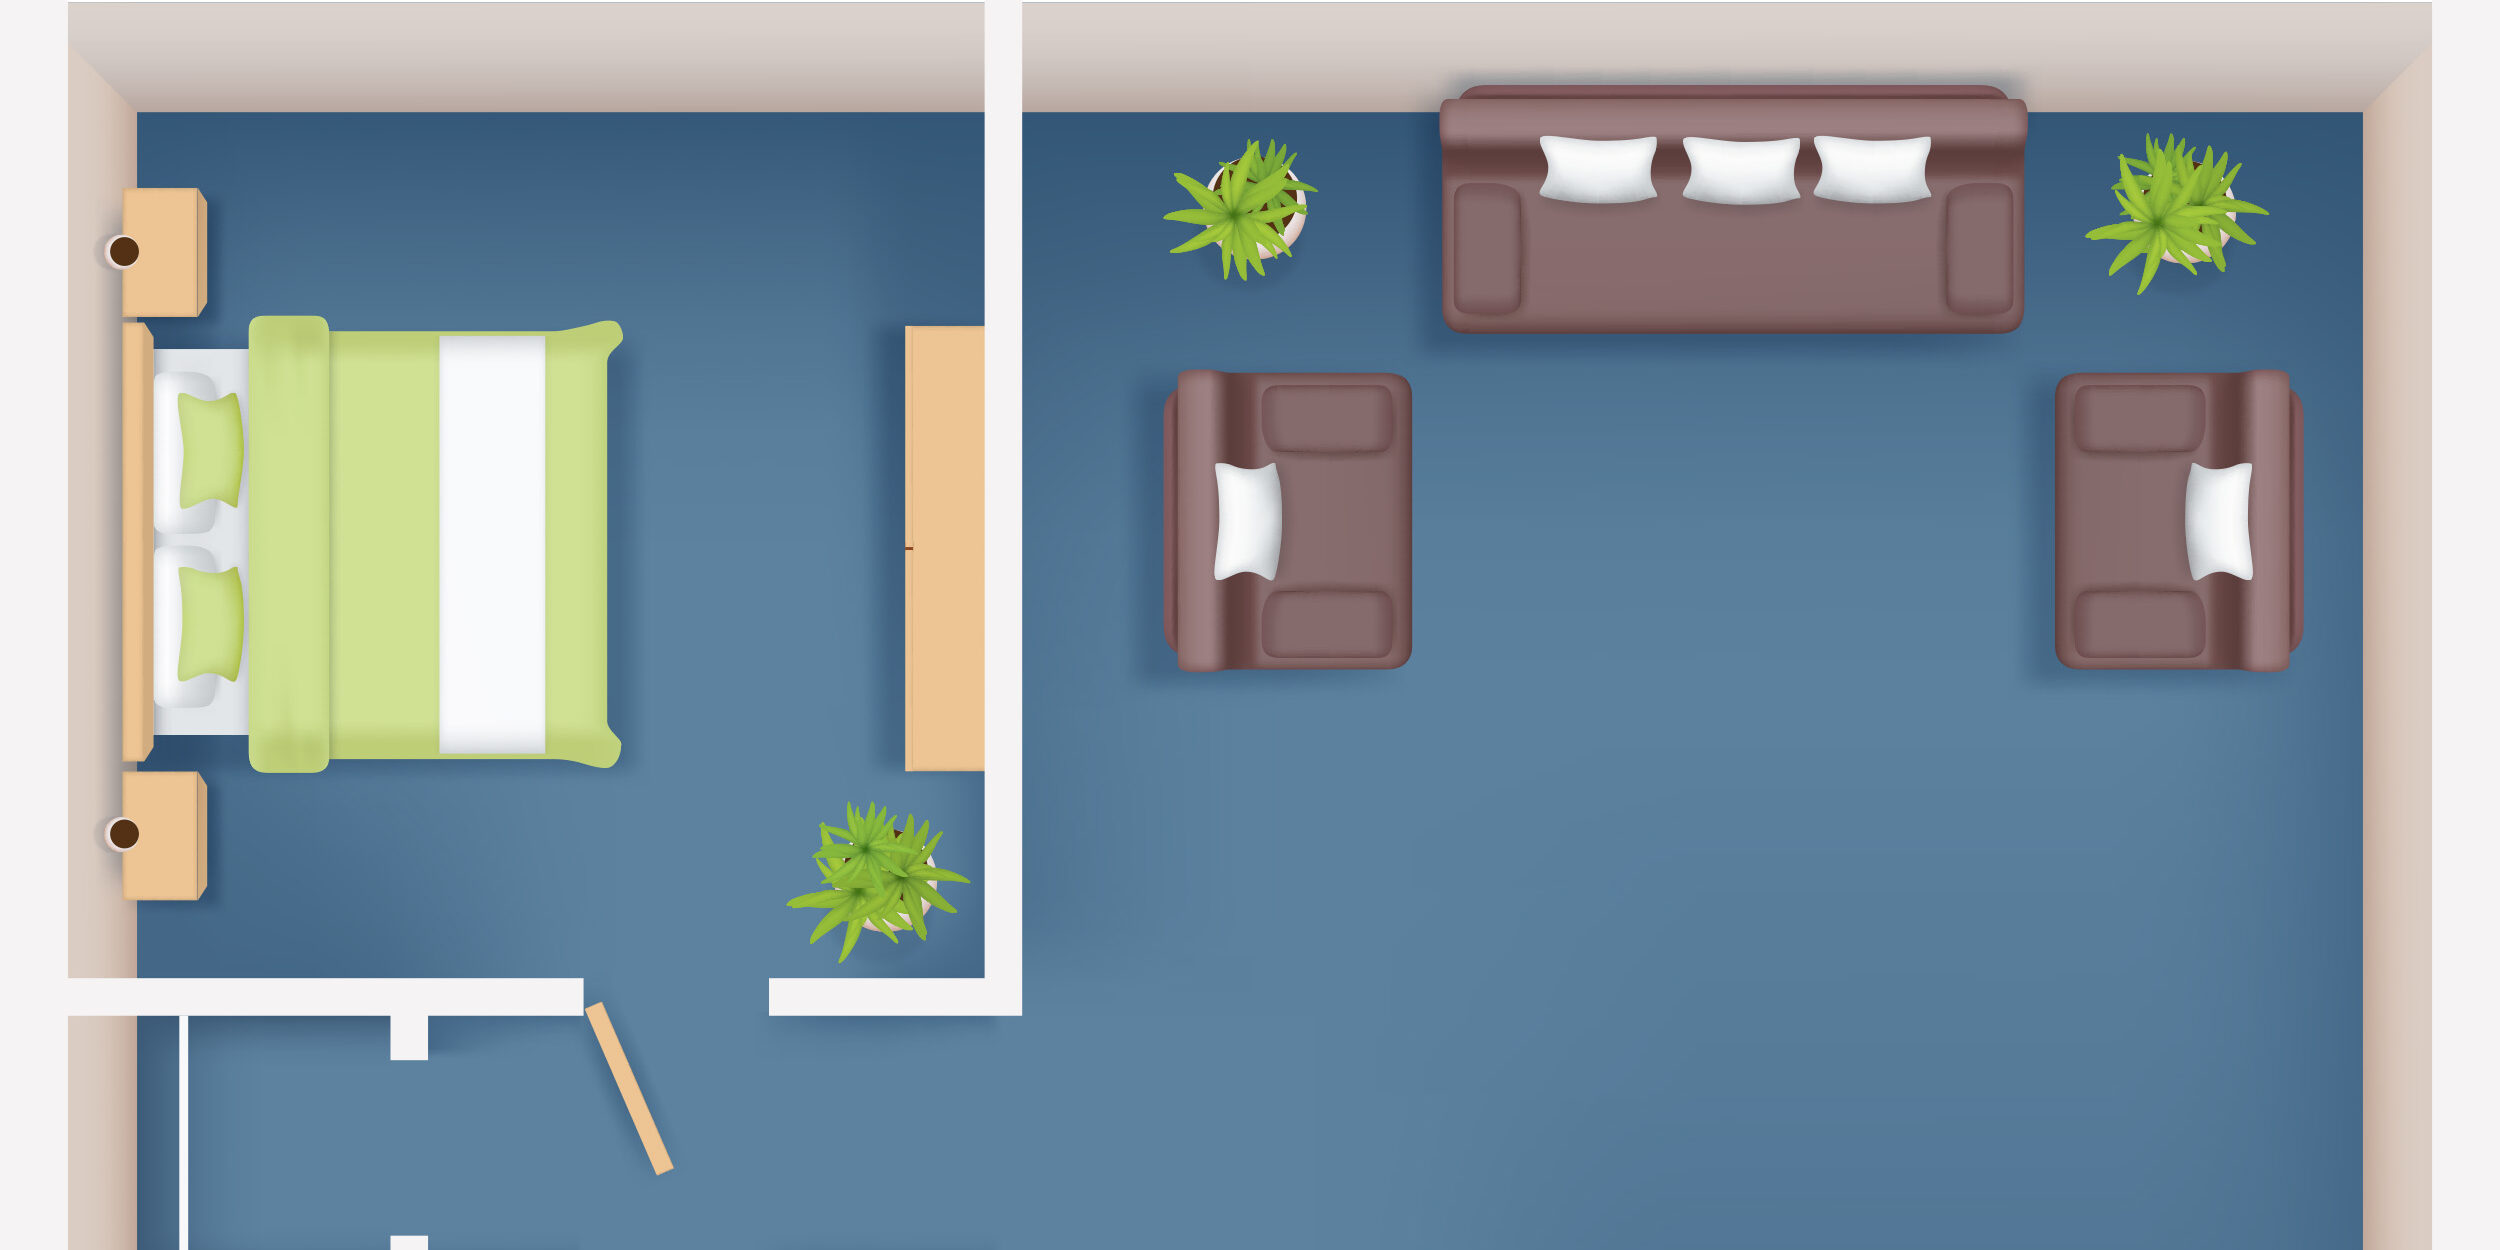 Illustration of an accessible home floor plan